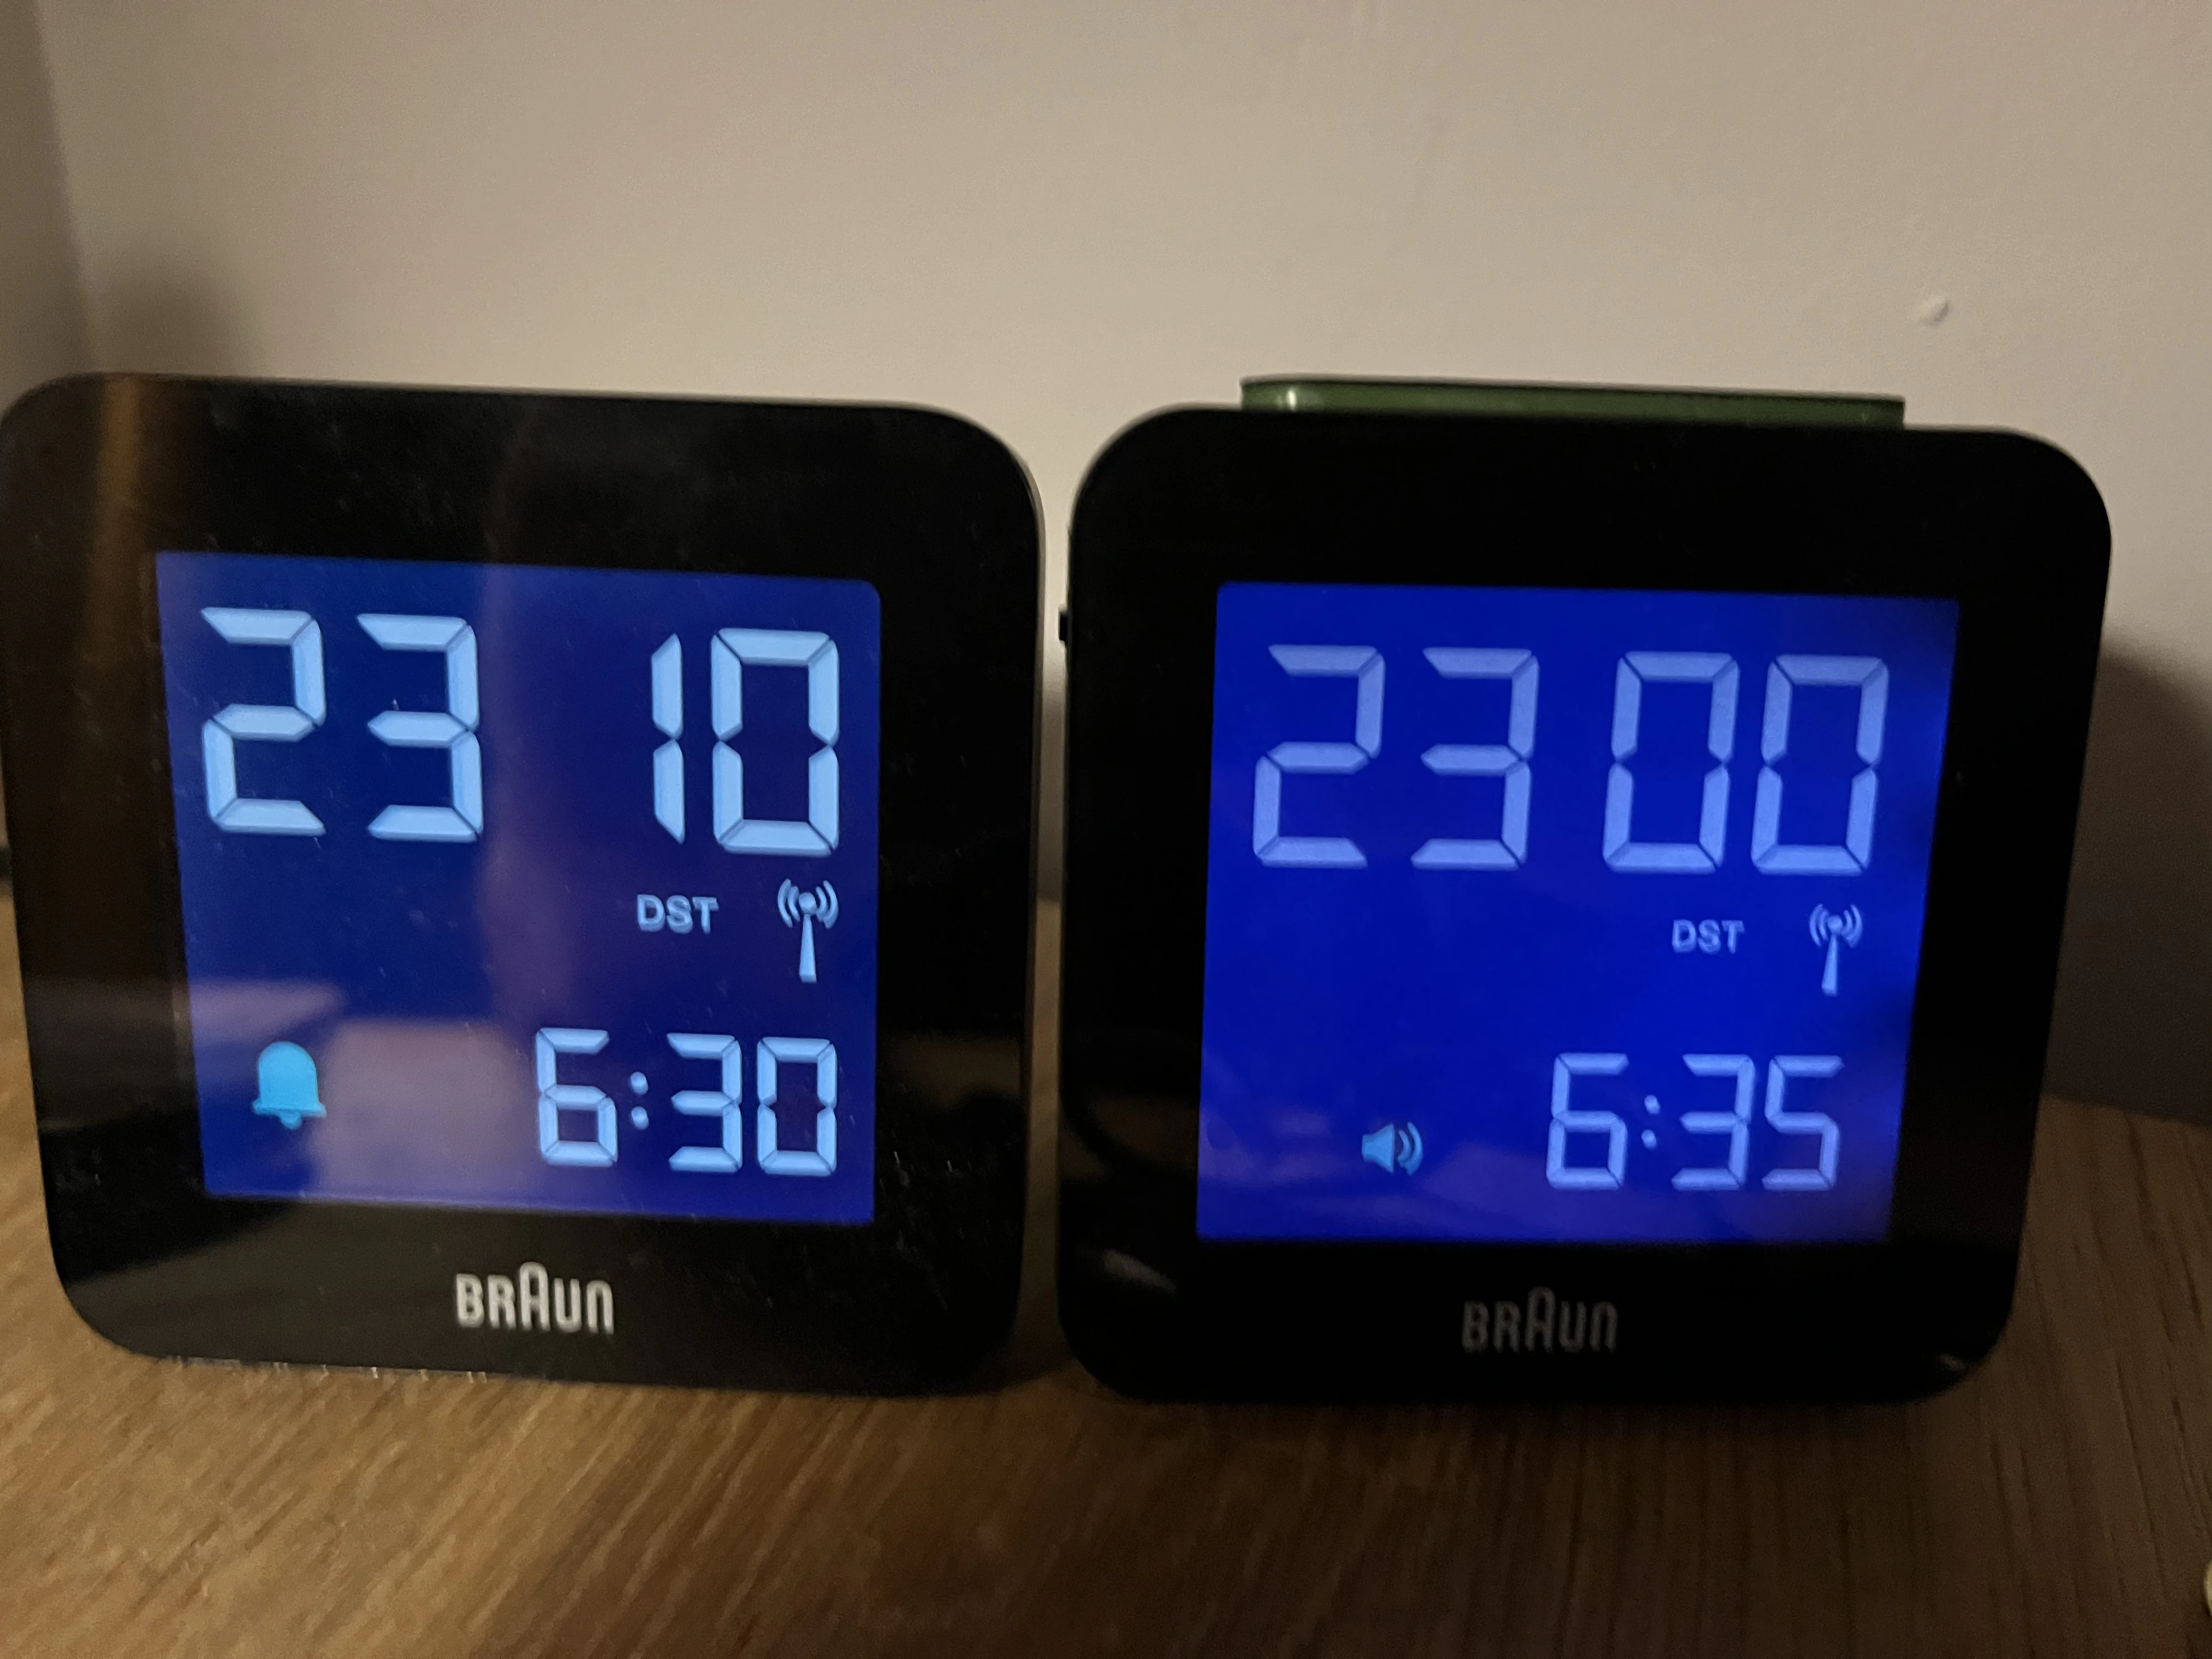 Two alarm clocks of the same kind displaying different times